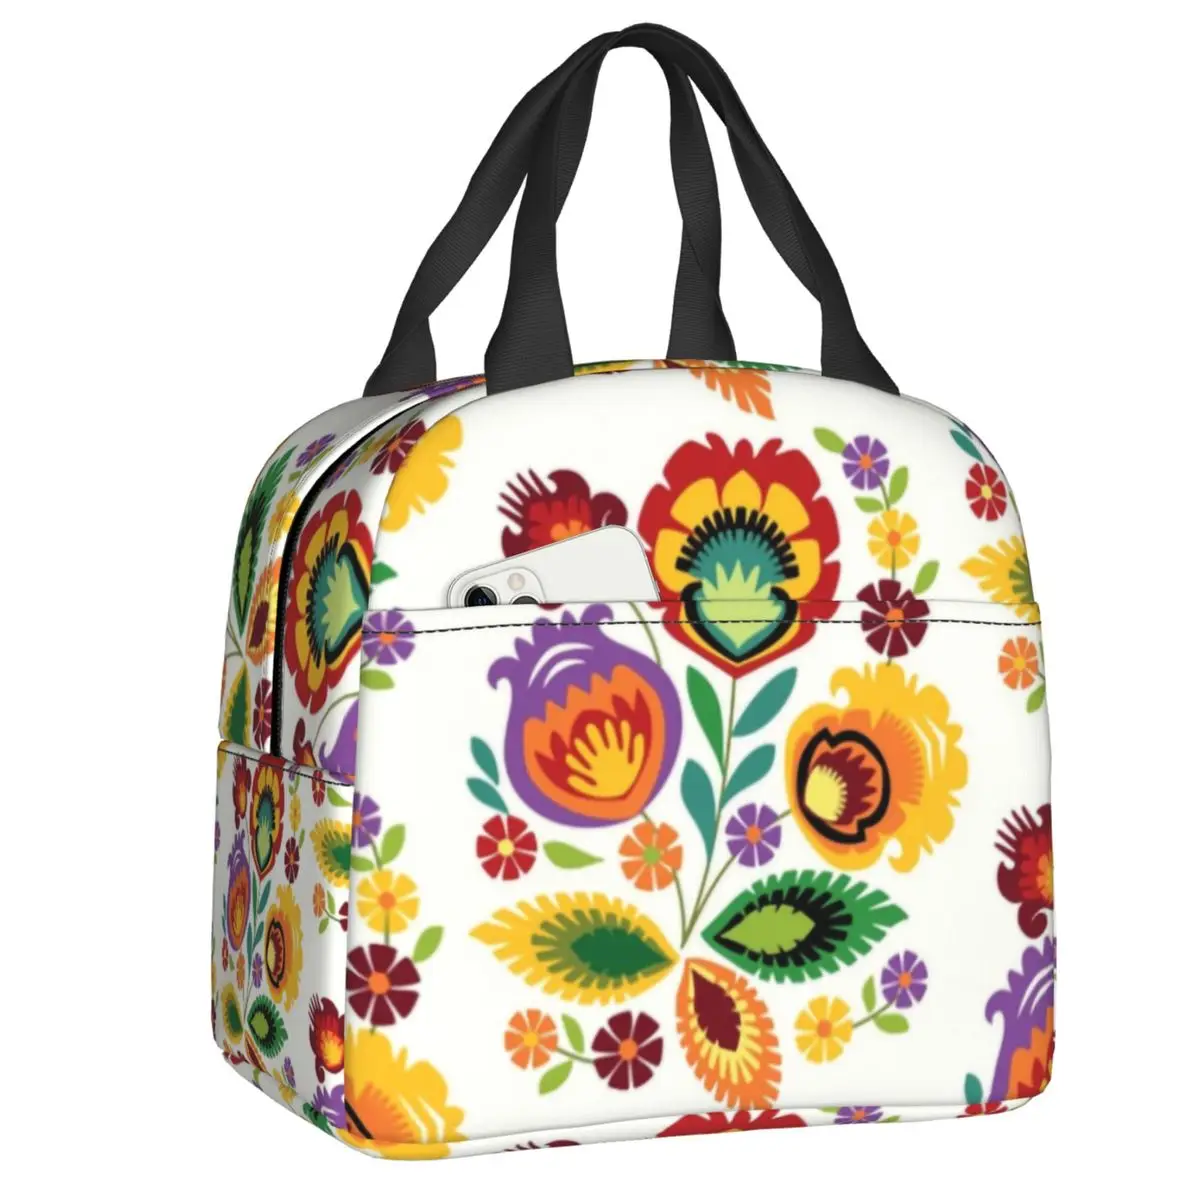 

Polish Folk Flowers Portable Lunch Box Poland Floral Print Cooler Thermal Food Insulated Lunch Bag for Women Kids Picnic Bags